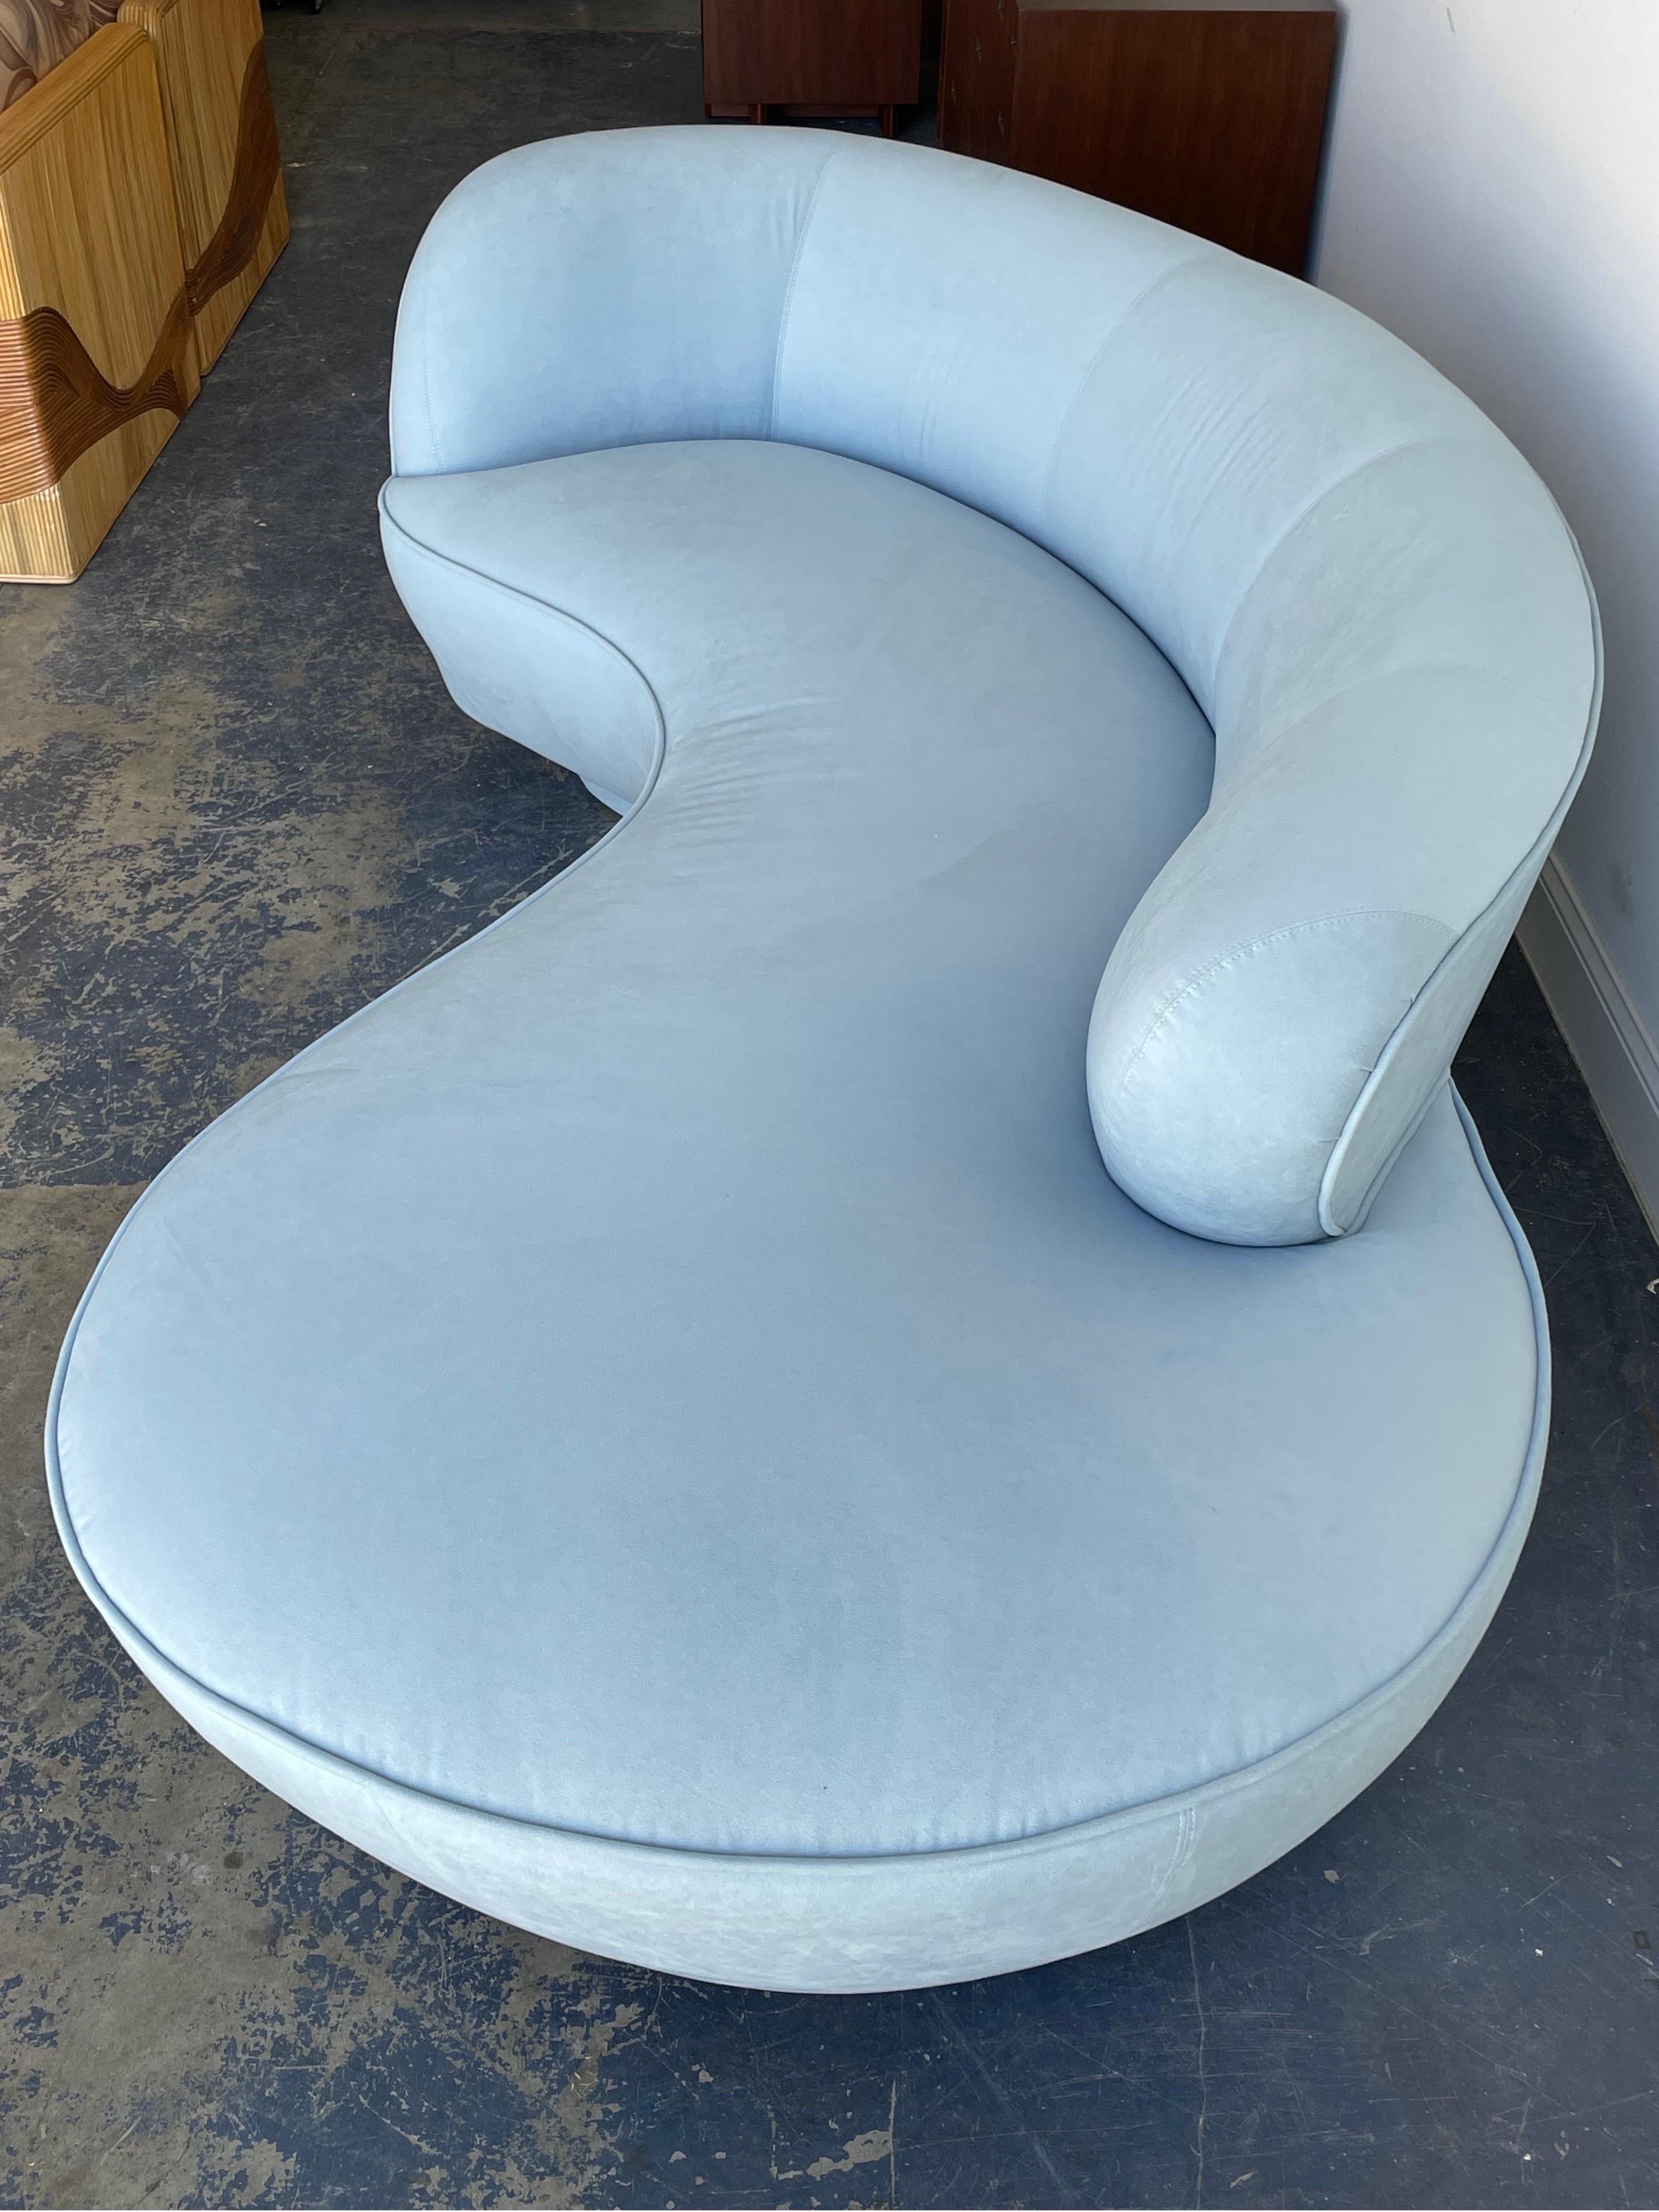 A classic sofa designed by Vladimir Kagan for Directional. Features a soft blue microsuede upholstery, above two round pedestal bases and a lucite center support. Great organic design in an uncommon color. 

Sofa was custom ordered in this color